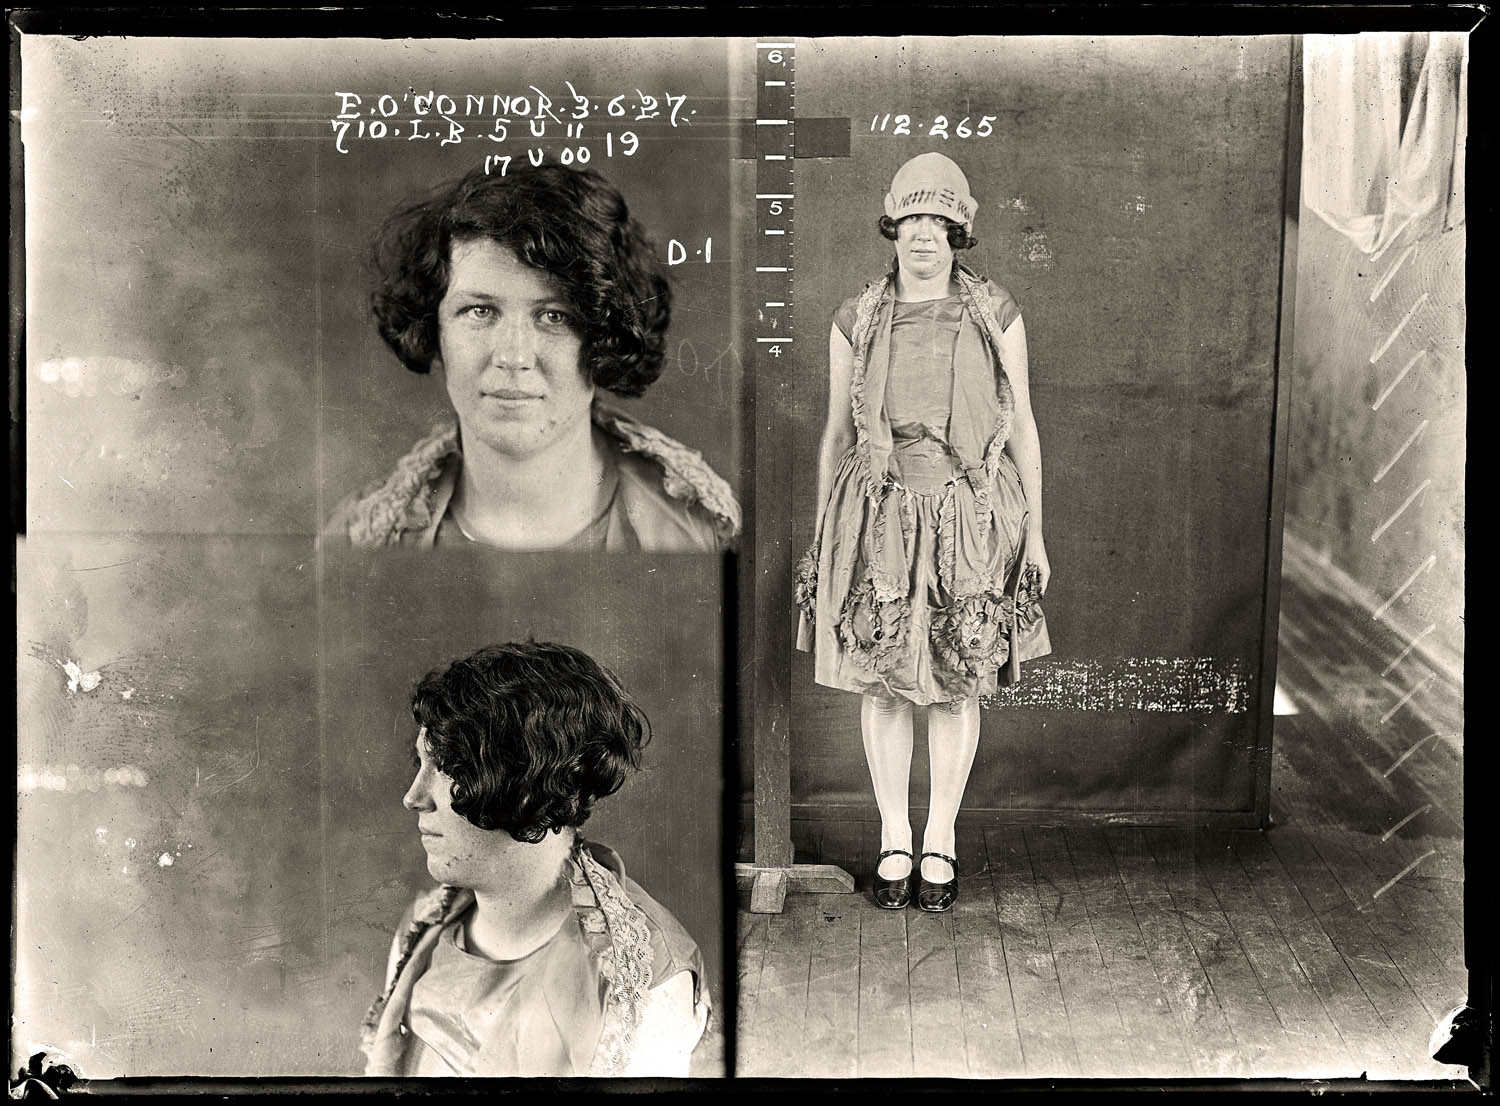 Eileen May O'Connor, criminal record number 710LB, 3 June 1927. State Reformatory for Women, Long Bay, NSW 